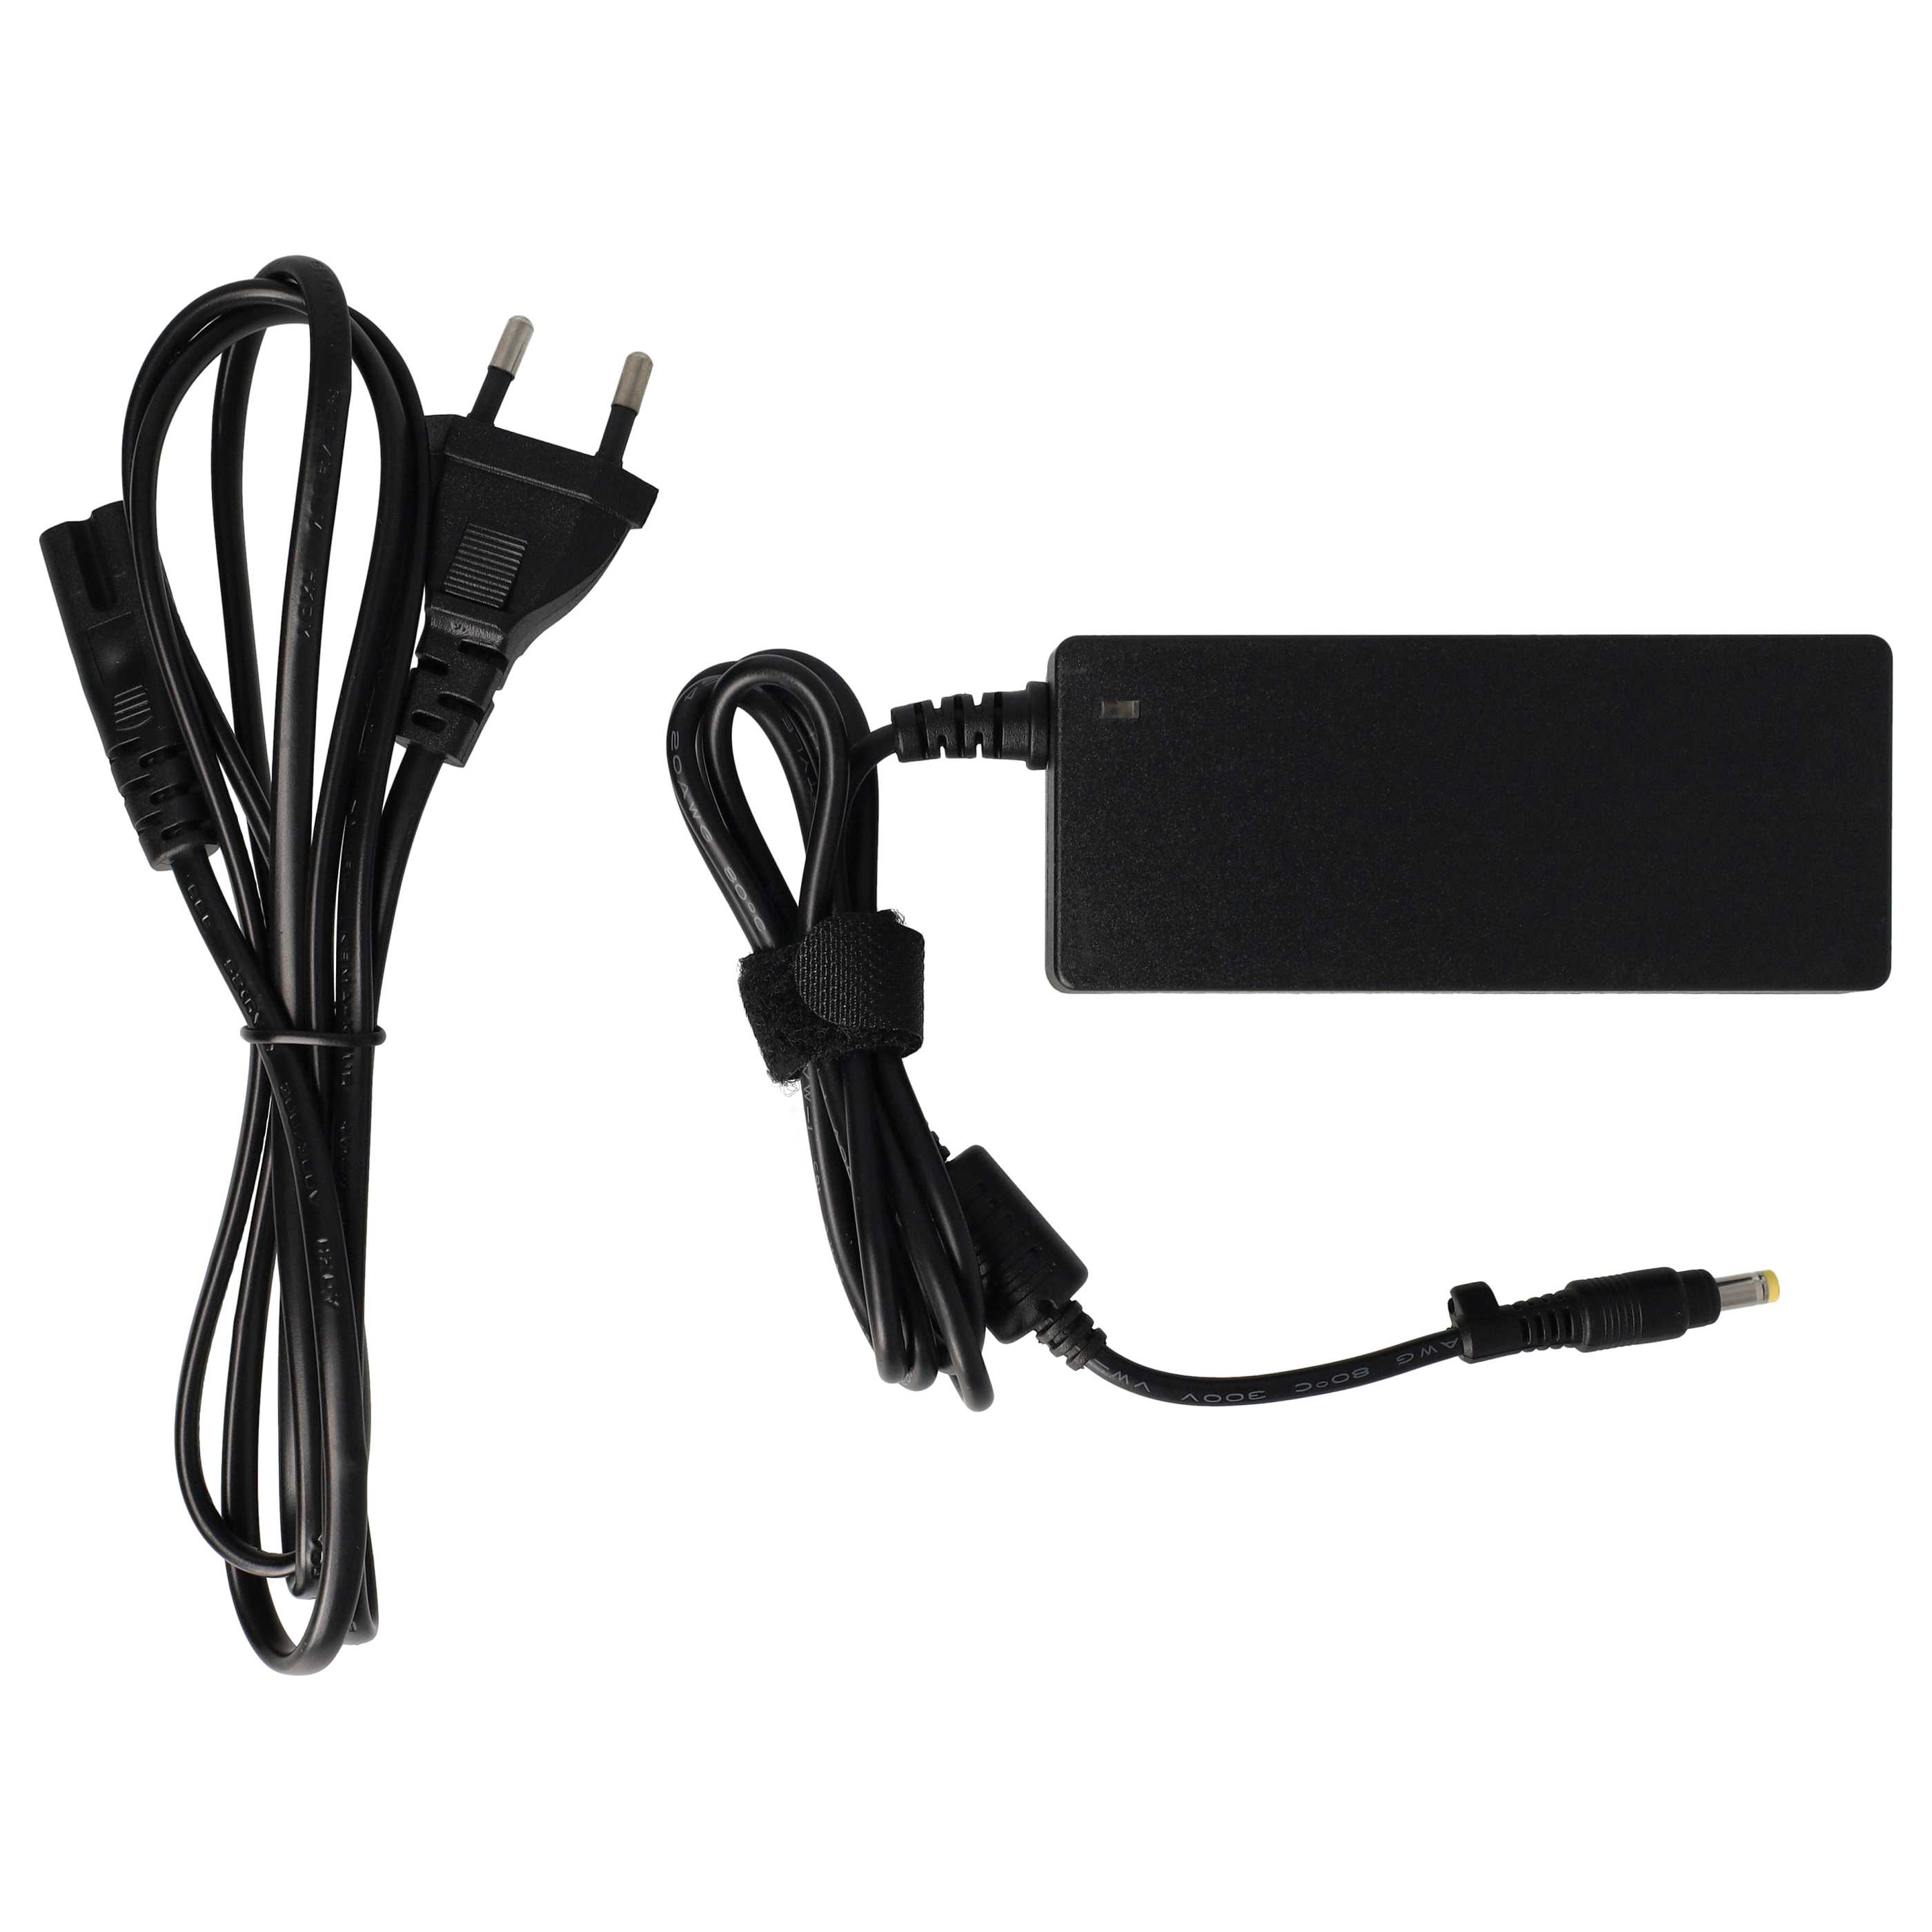 Mains Power Adapter replaces HP 239428-001, PPP012L, 239705-001 for HPNotebook etc., 50 W